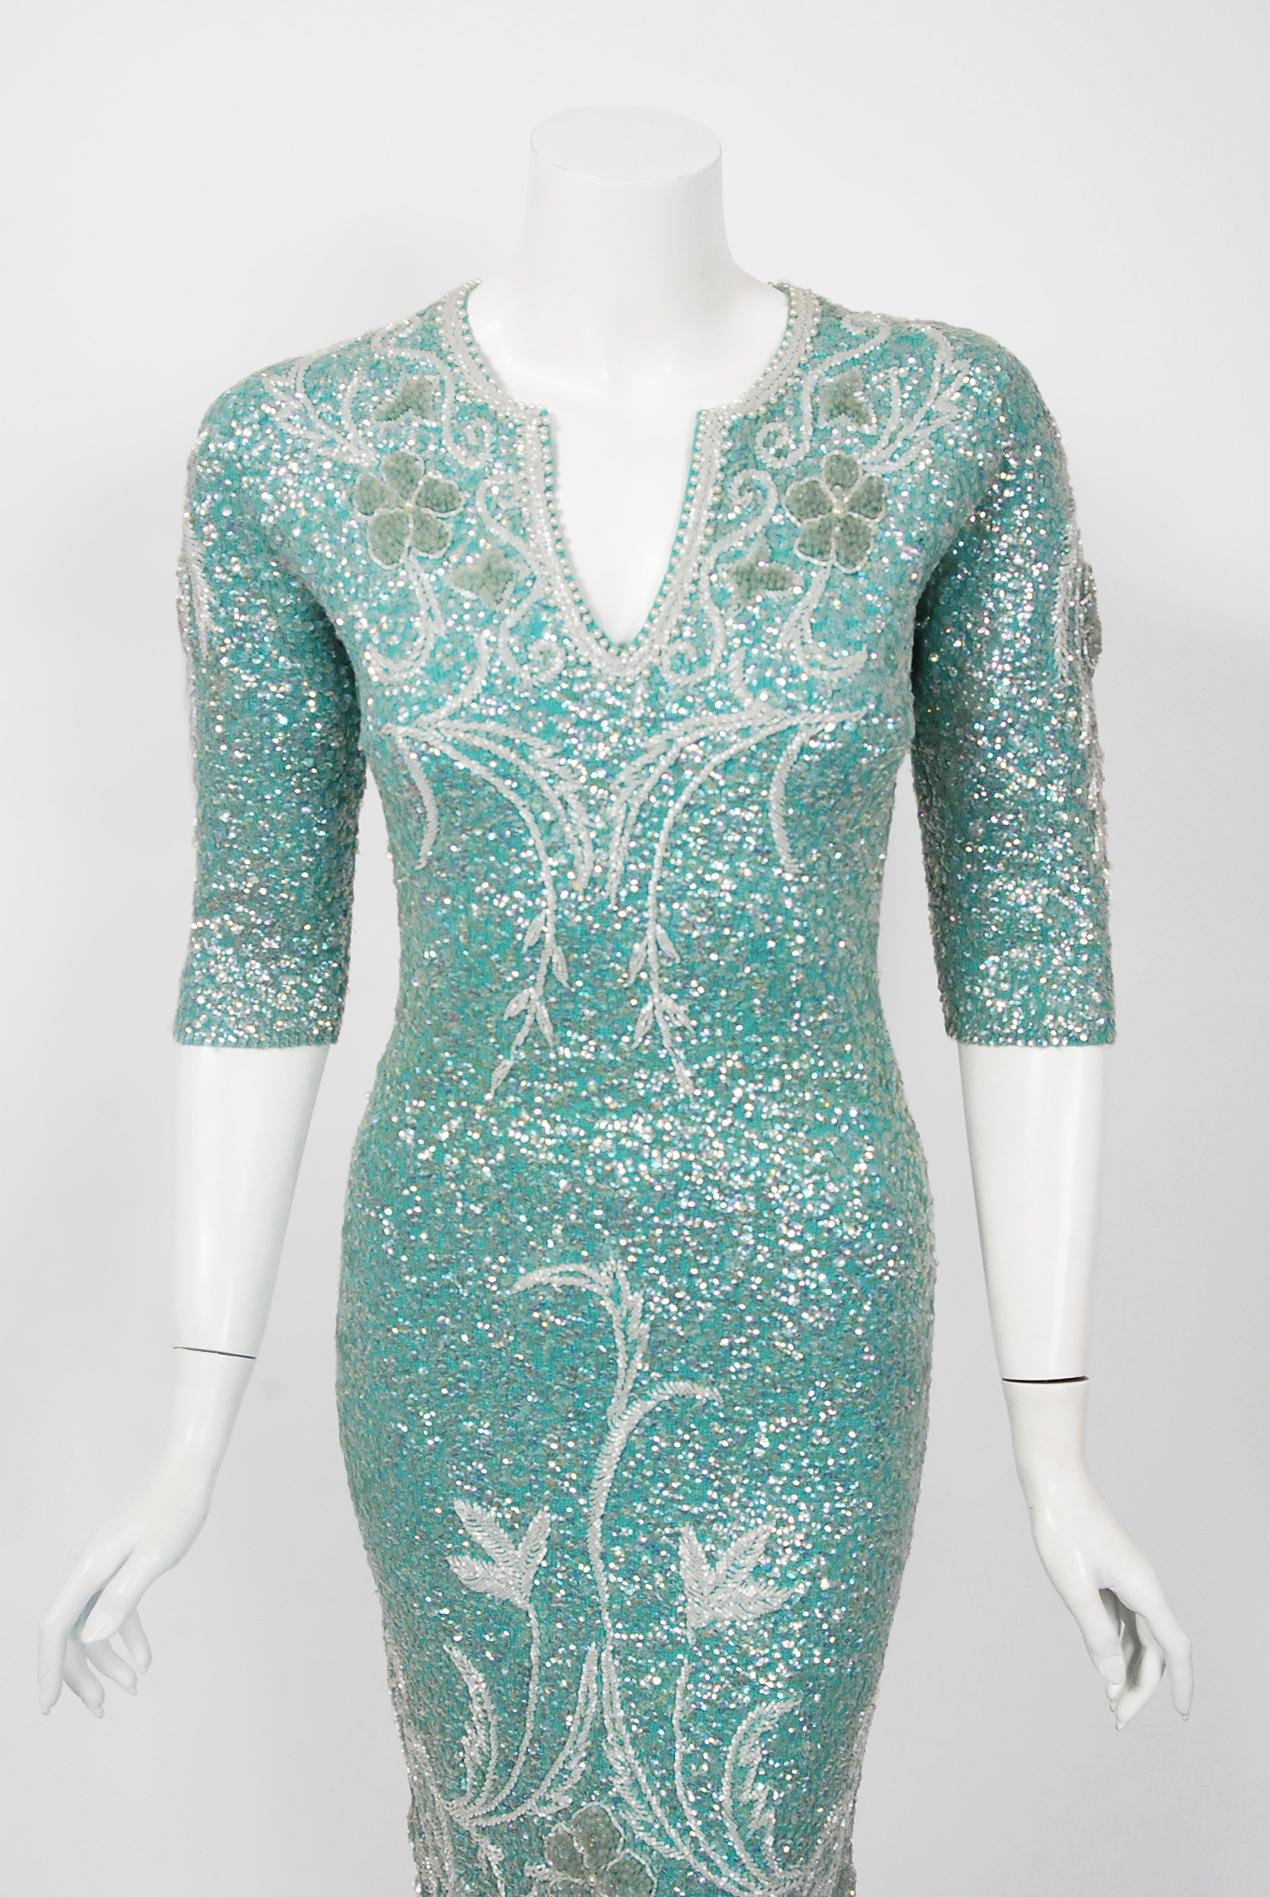 Mid-century Gene Shelly designer garments are in a class of their own. They are always fully-beaded by hand and fit to flatter the figure. This late 1950's treasure is fashioned in the most stunning turquoise blue color, featuring iridescent